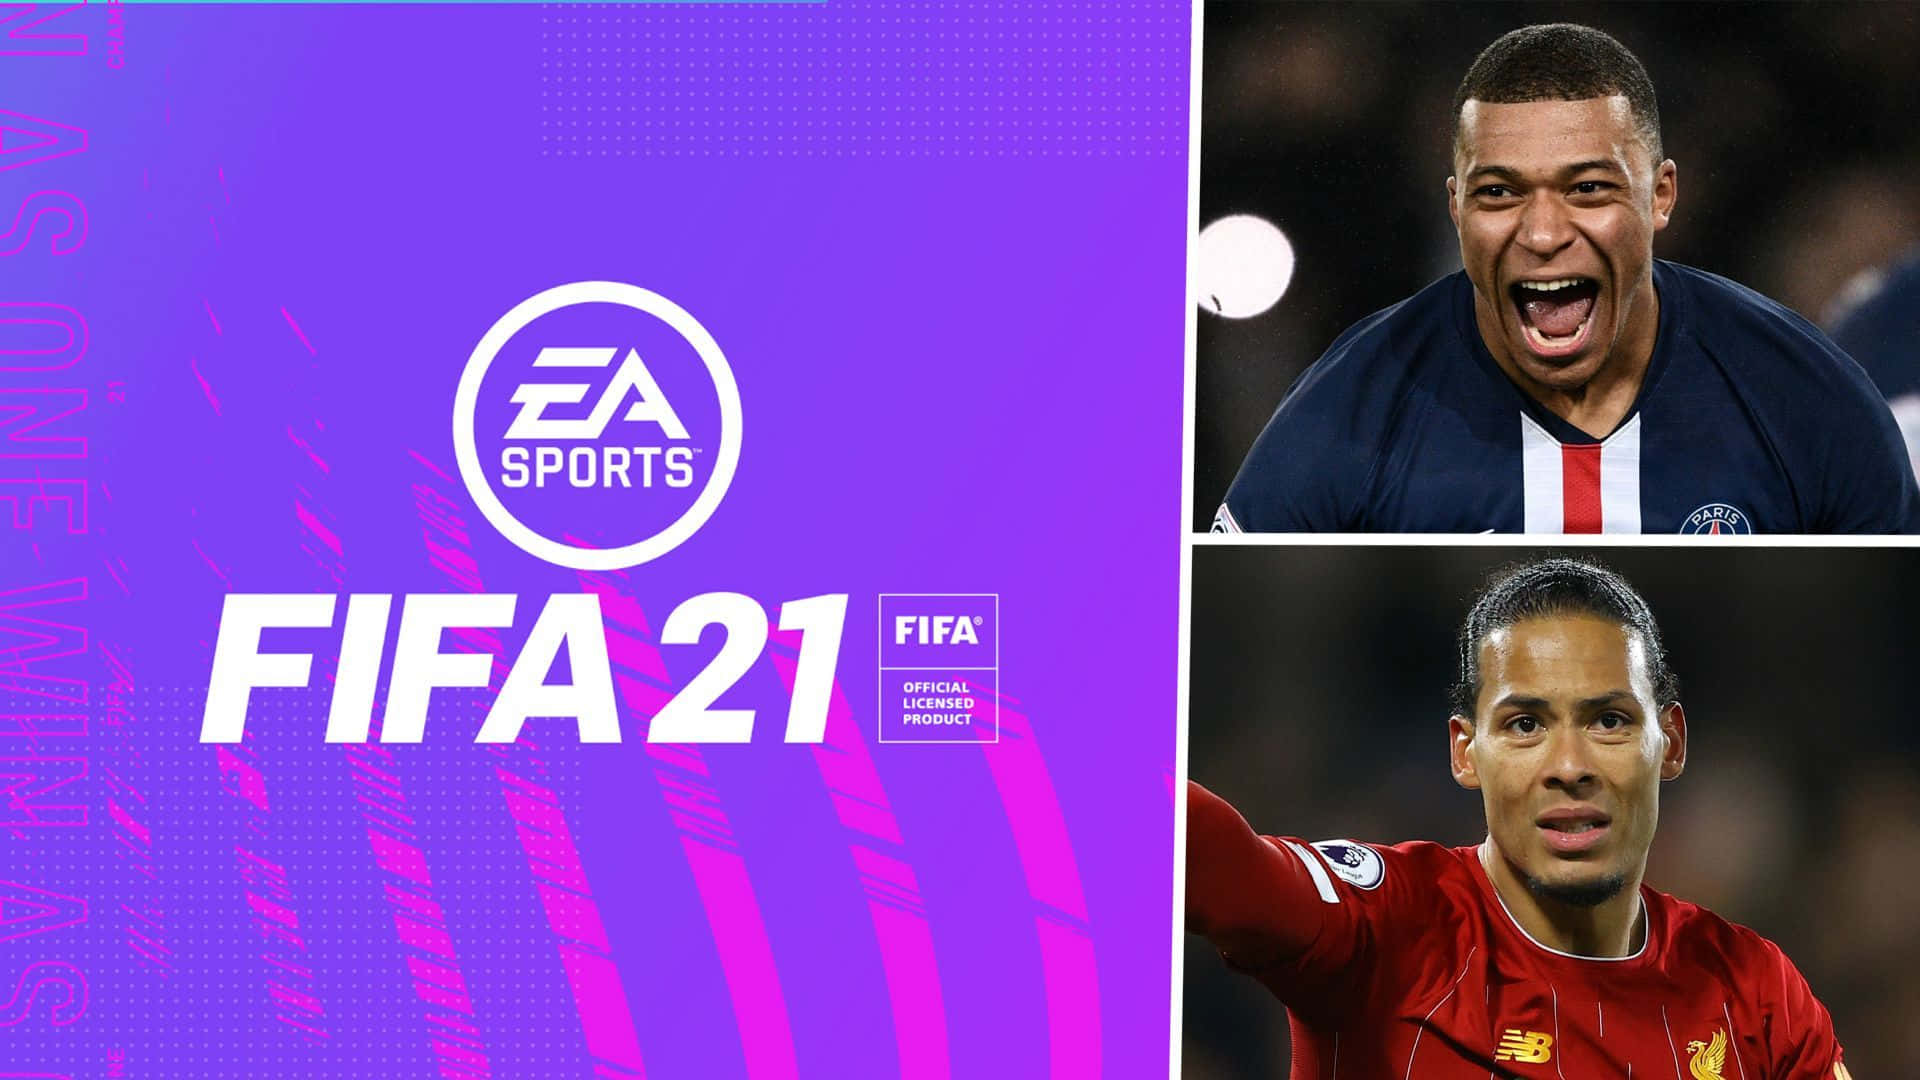 Experience a next-level gaming experience with FIFA 21